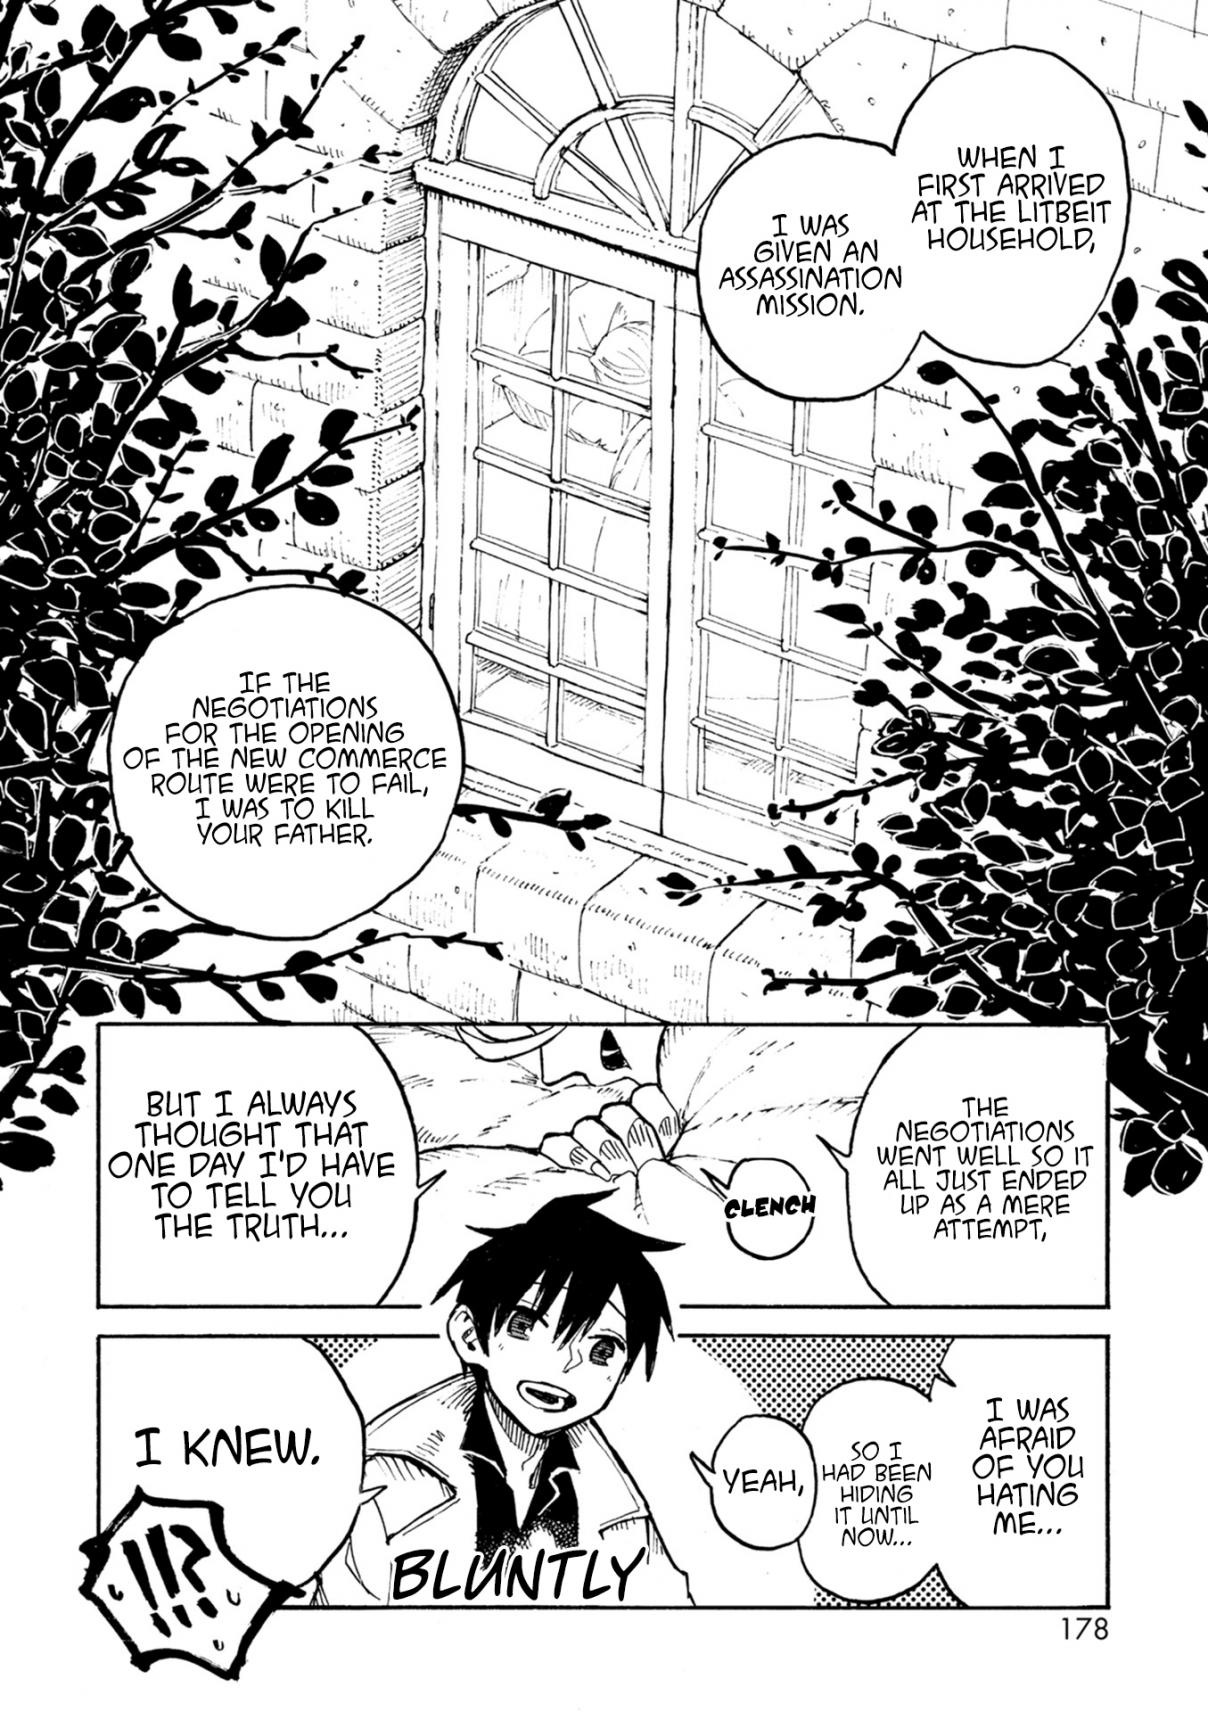 Monster Musume no Oishasan Ch. 4.4 The Fourth Case